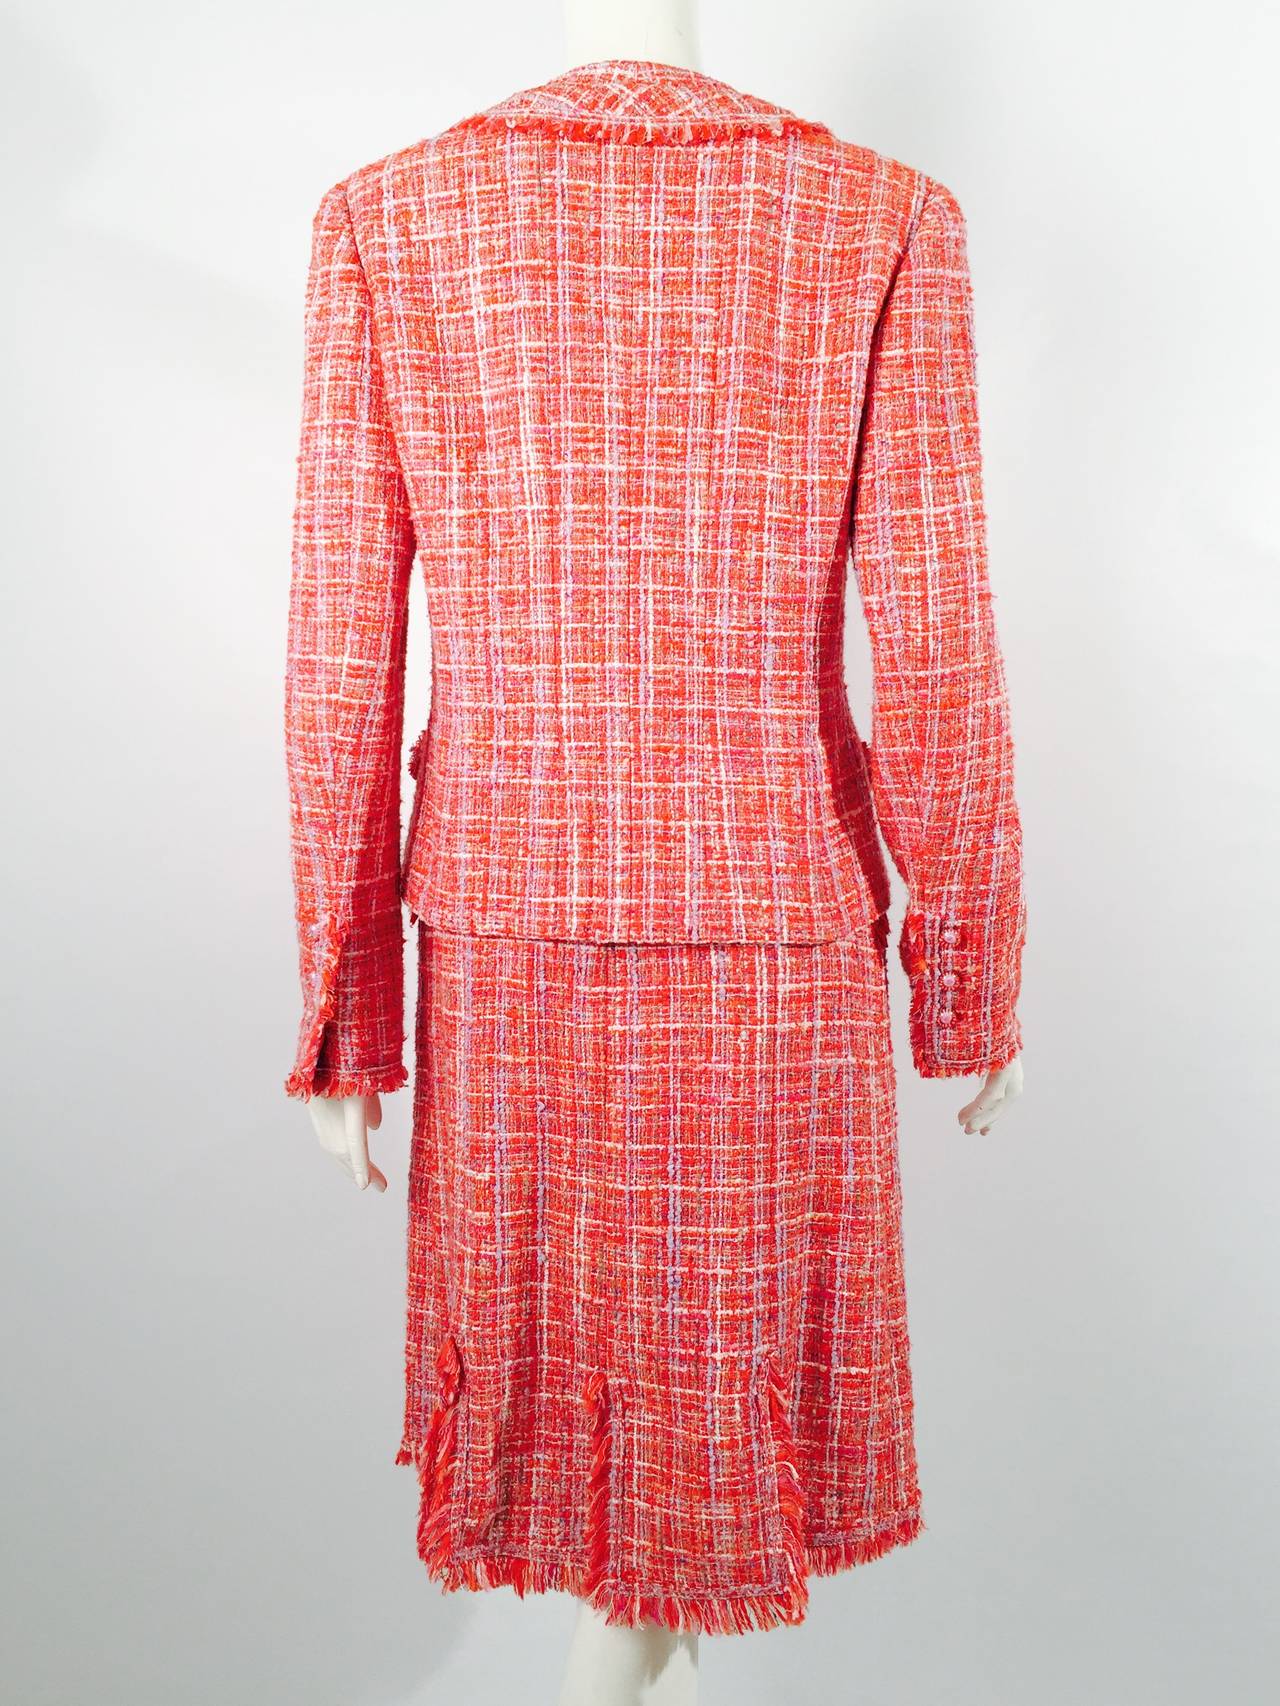 Chanel 2004 Spring Fringe Tweed Skirt Suit In Excellent Condition For Sale In Palm Beach, FL